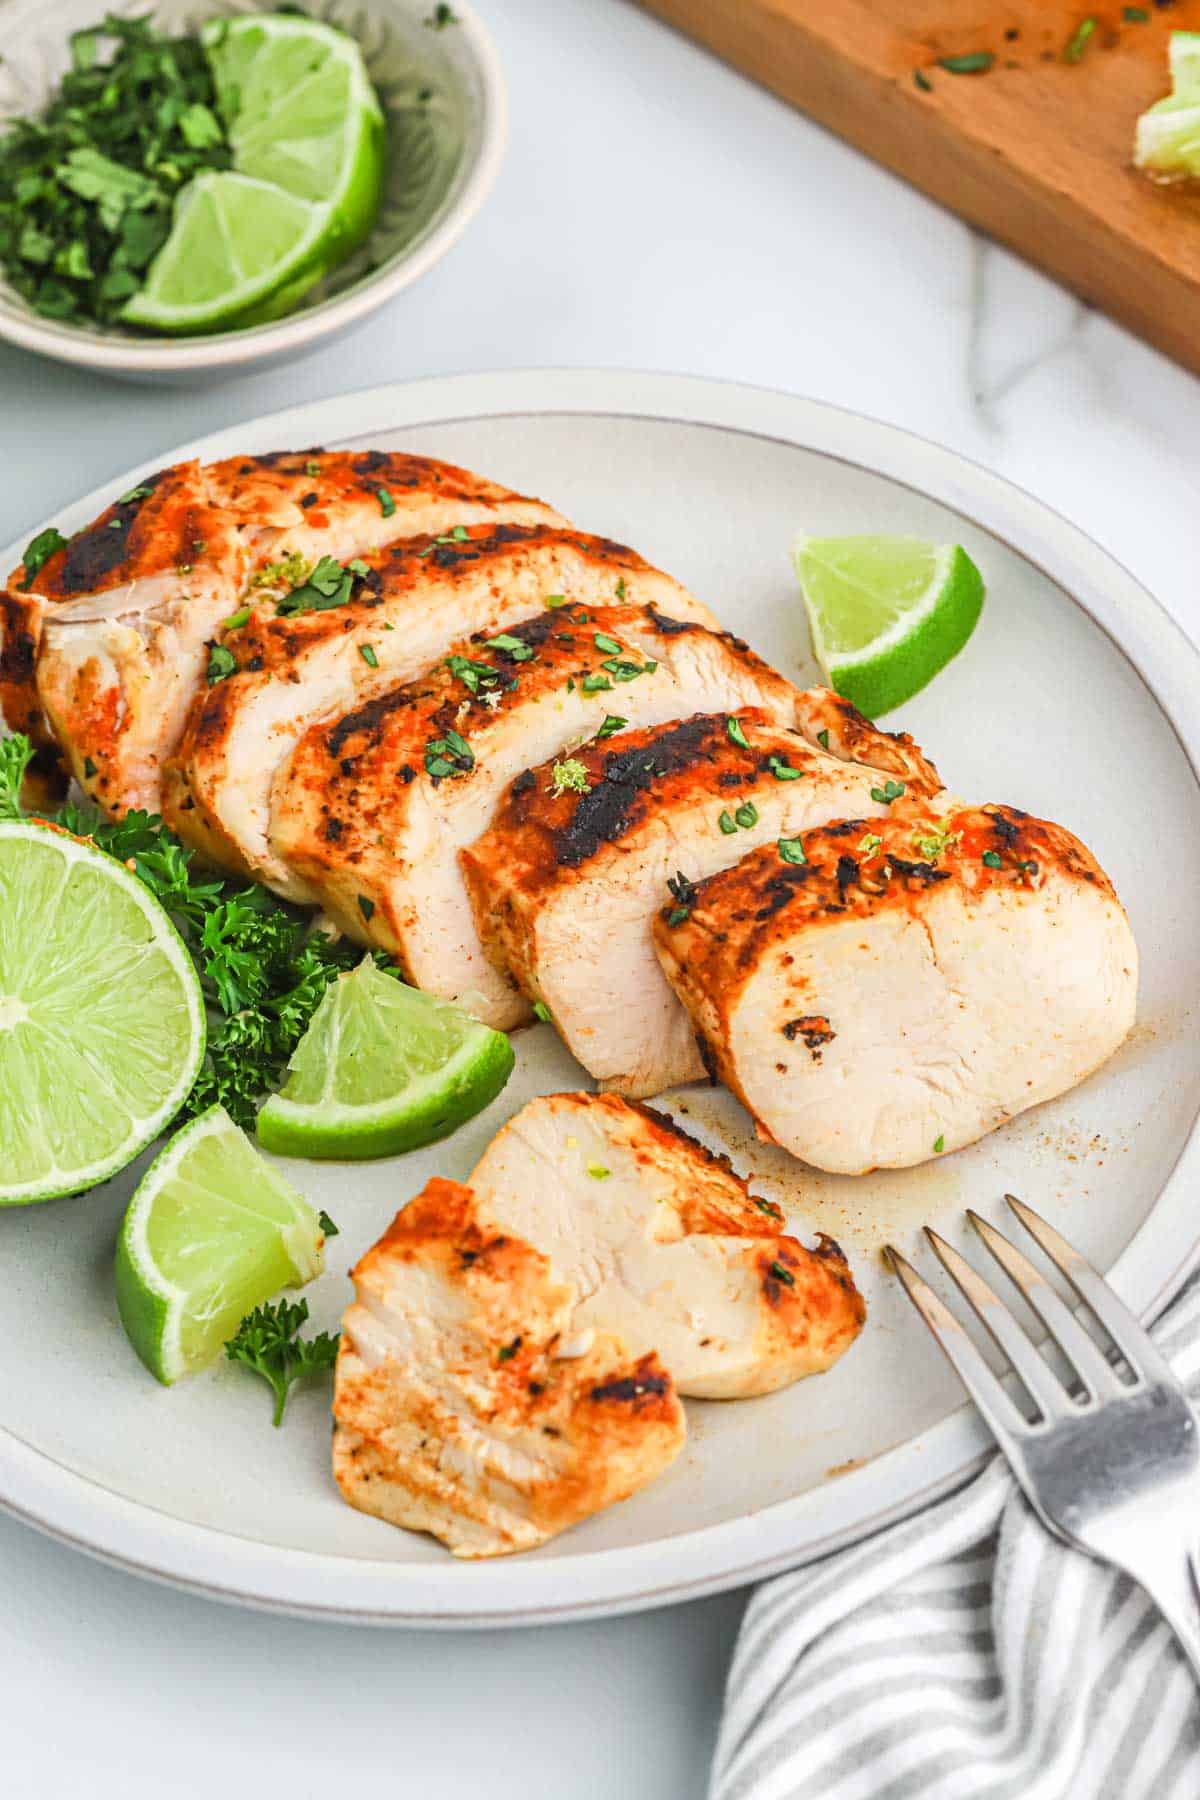 A plate of sliced grilled chicken garnished with cilantro and lime wedges.